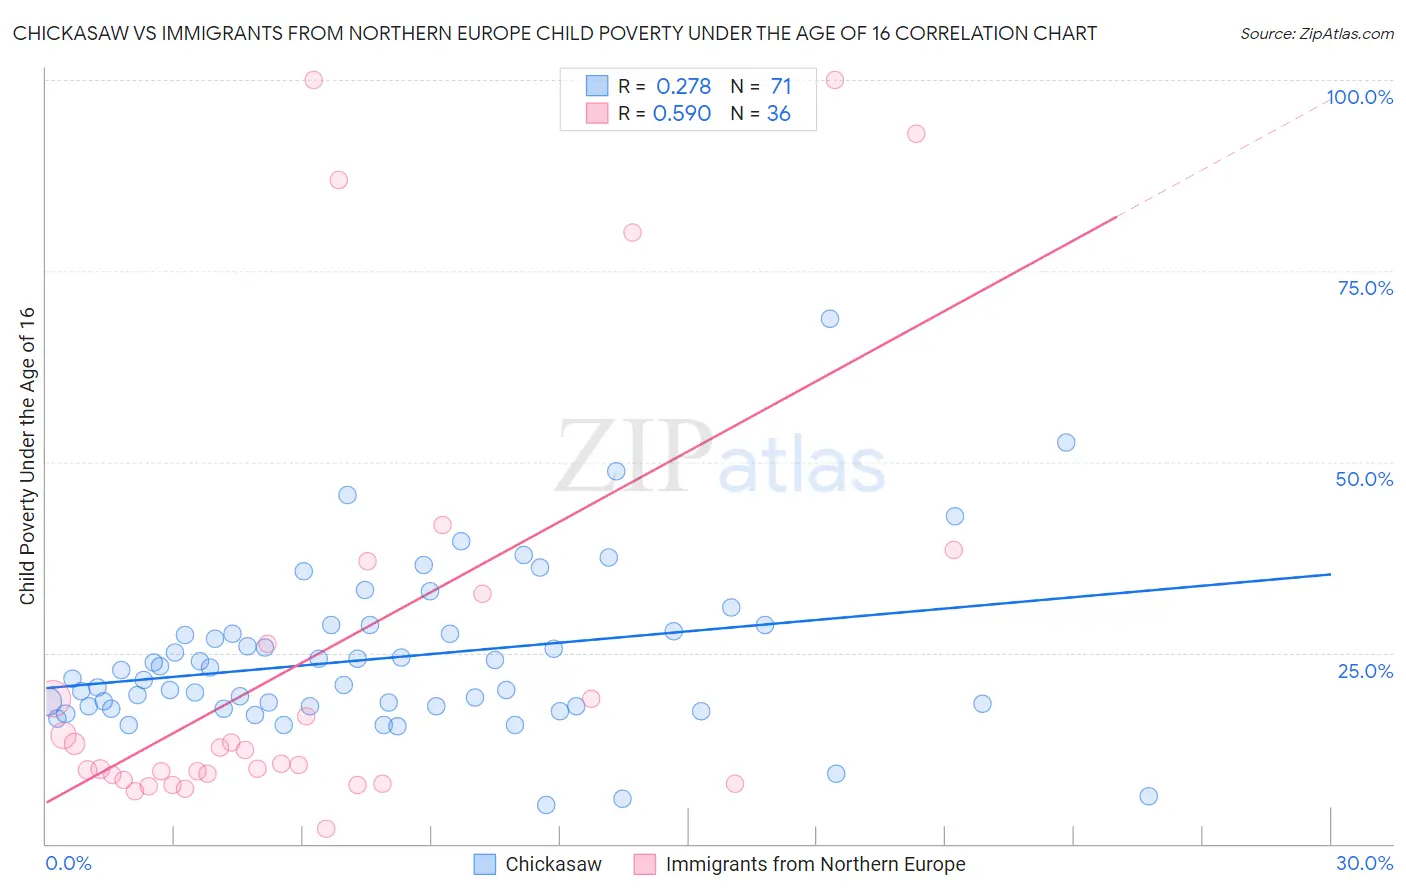 Chickasaw vs Immigrants from Northern Europe Child Poverty Under the Age of 16